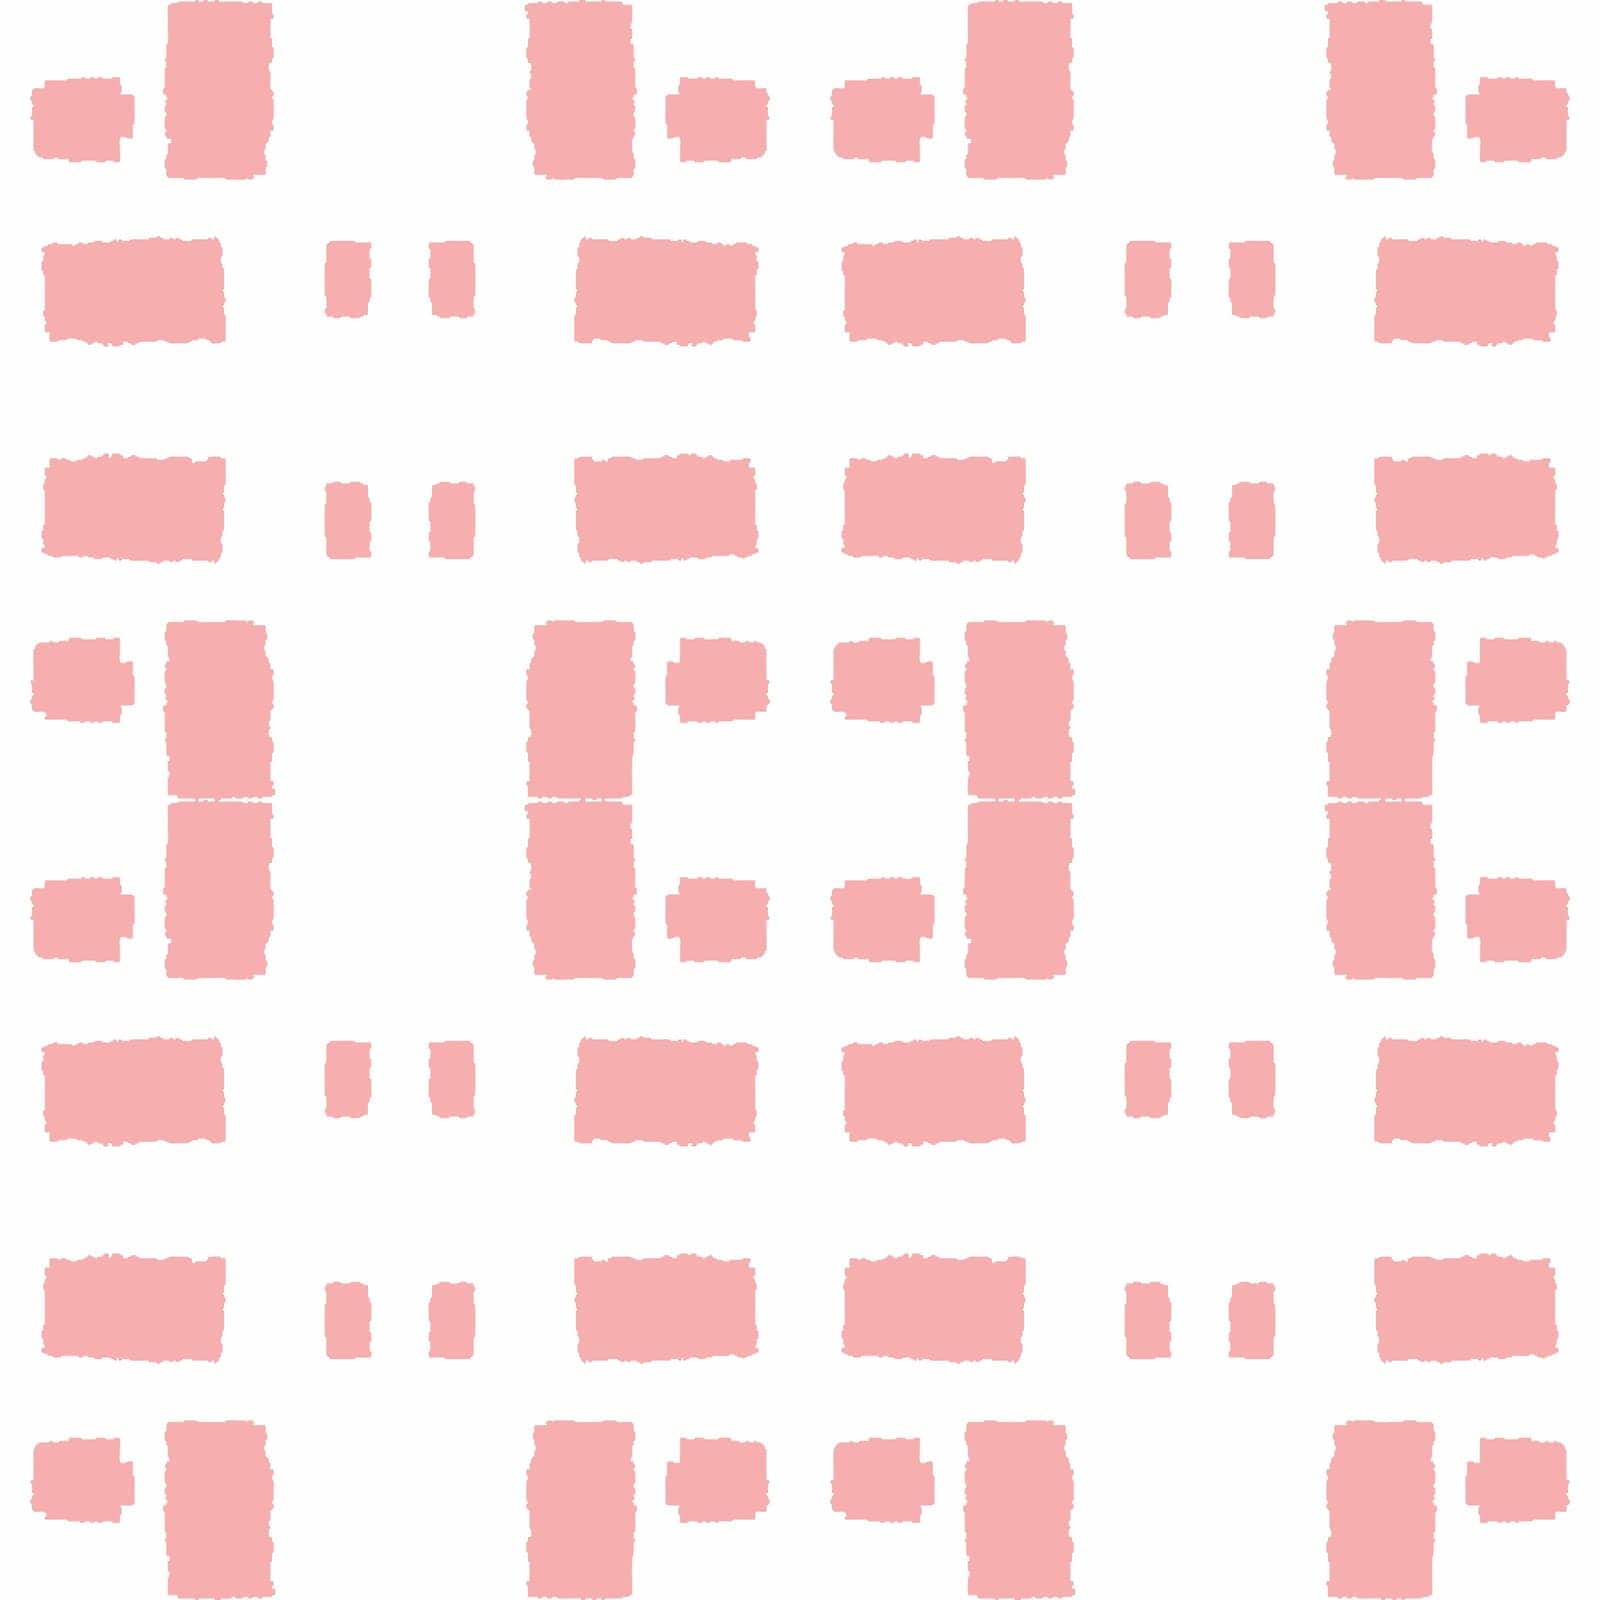 Pink rectangles in the form of tile seamless pattern. vector illustration